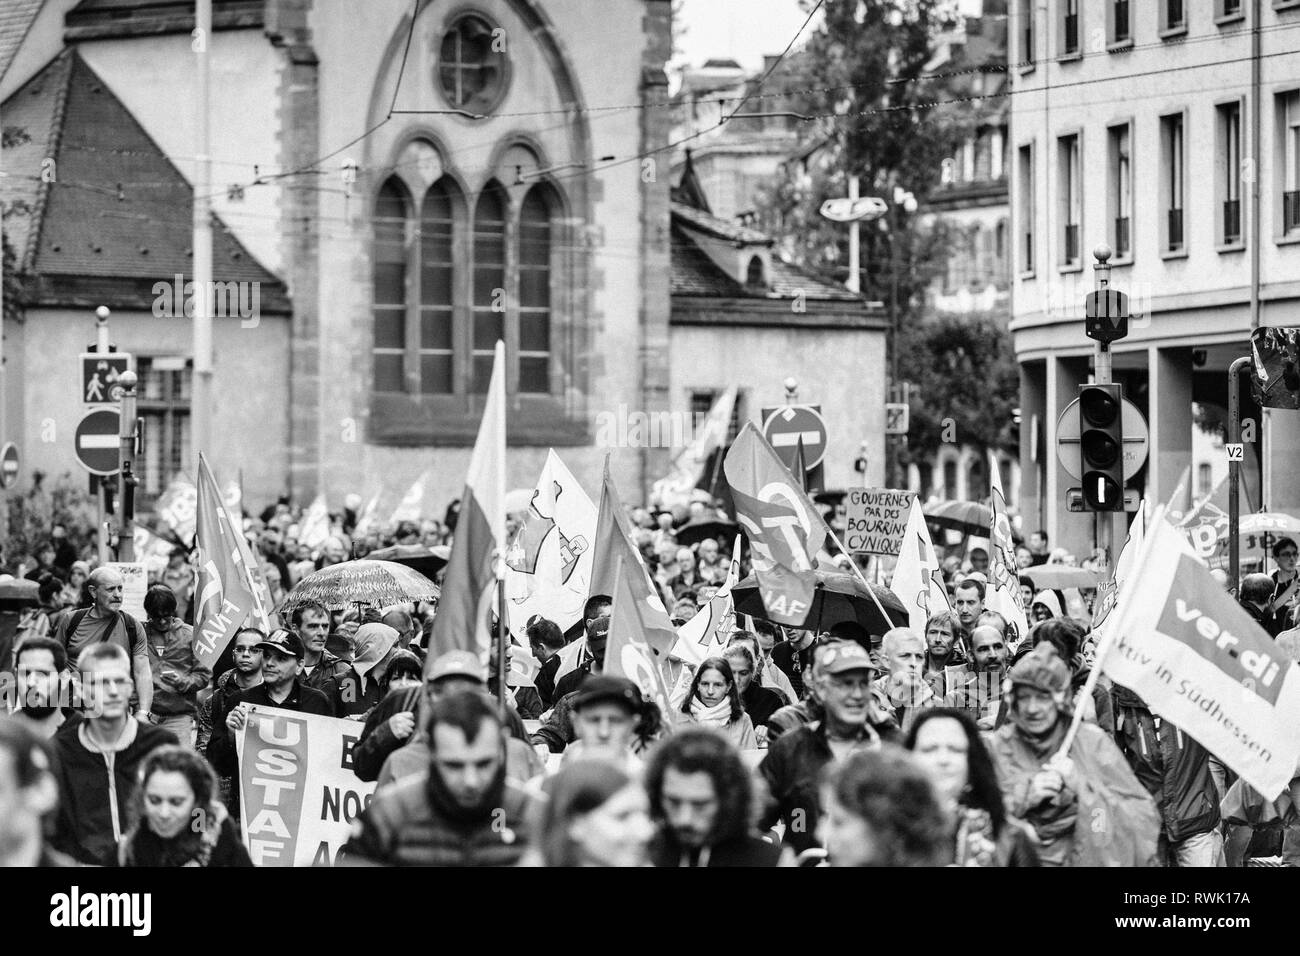 Strasbourg, France - Sep 12, 2017: Large crowd of people march during a French Nationwide day of protest against the labor reform proposed by Emmanuel Macron Government Stock Photo